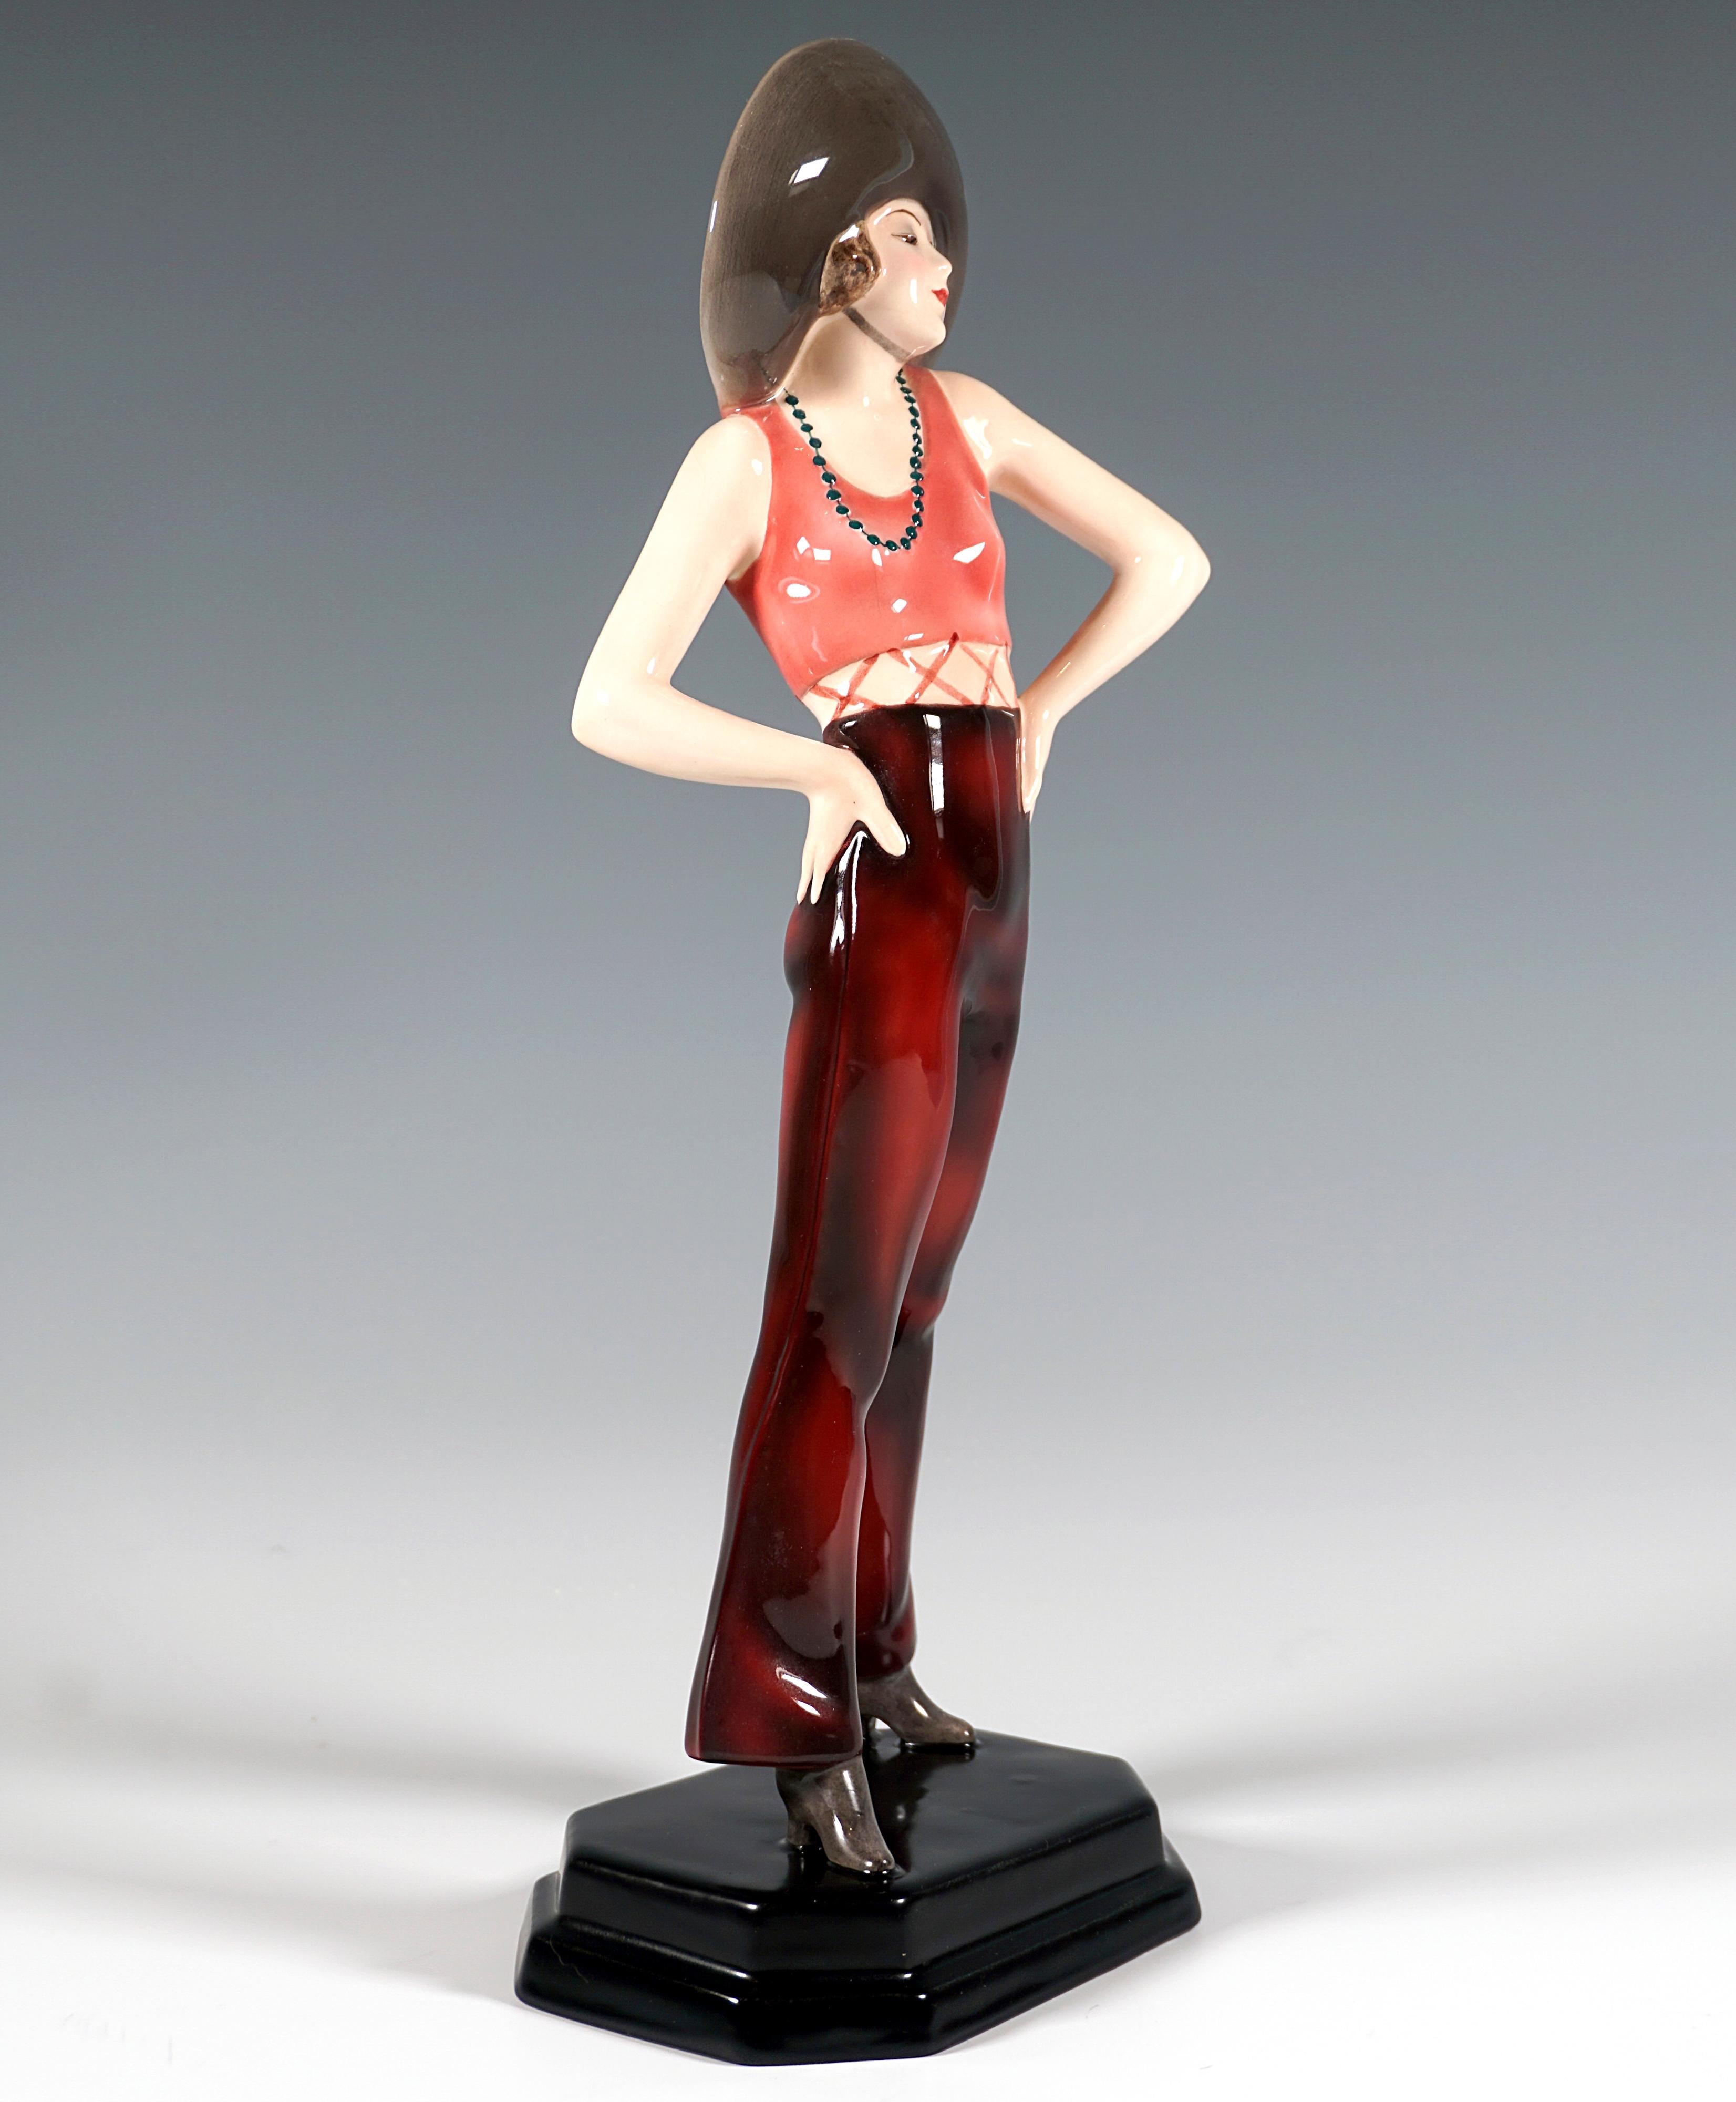 Very Rare Art Ceramic Figurine Around 1929:
Girl with a wide-brimmed hat on her short curls, sleeveless, short top, wearing long flared trousers and cowboy boots on her feet, standing with her legs apart and her hands on her hips, a long pearl